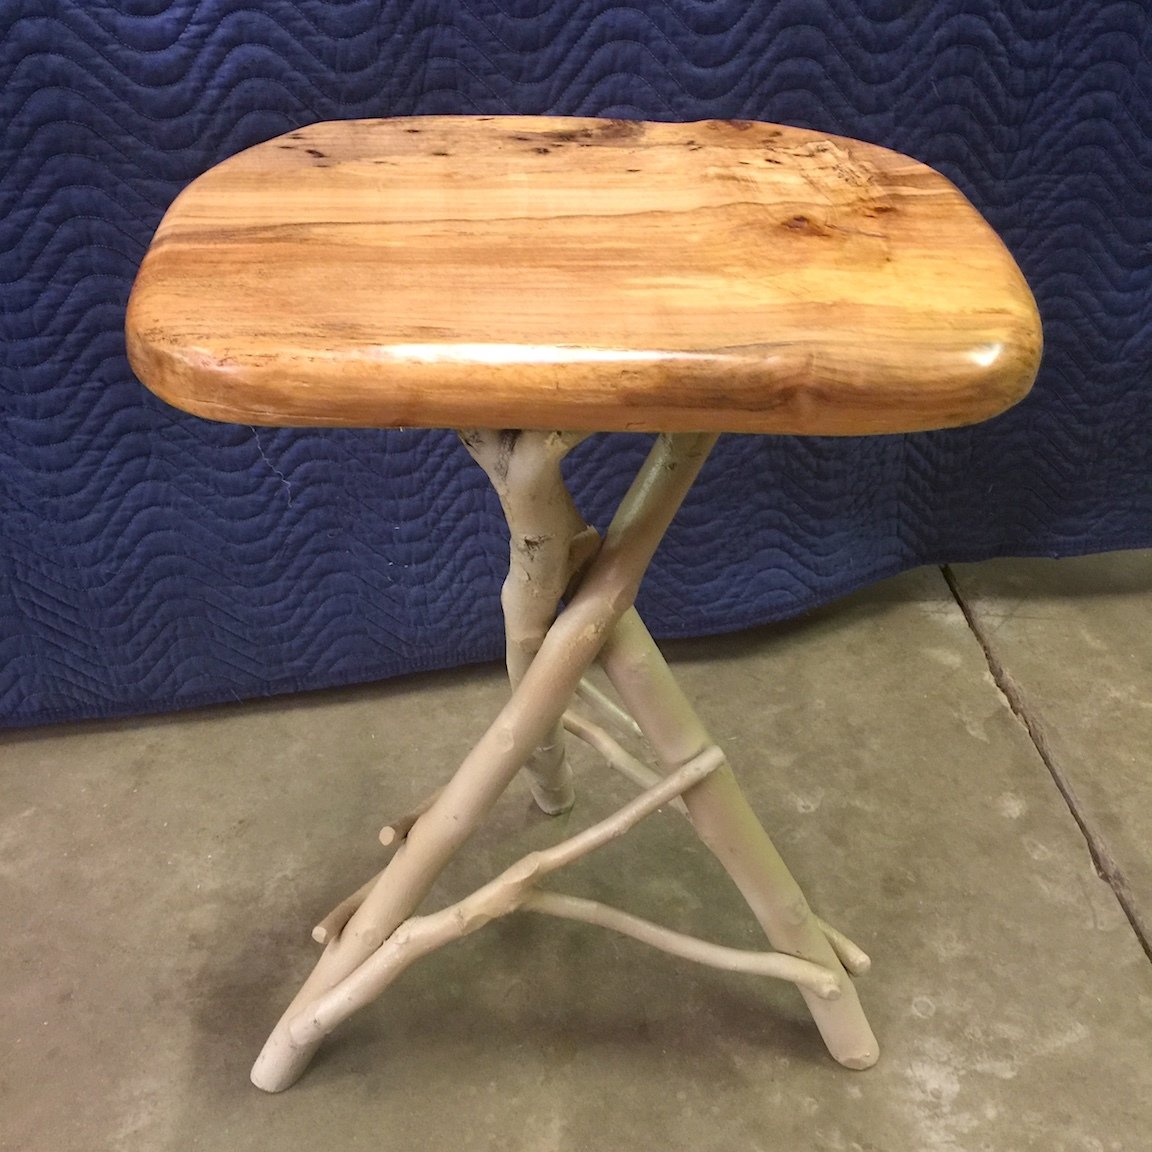 Spaulted Maple Top Tripod, Painted Twig Base